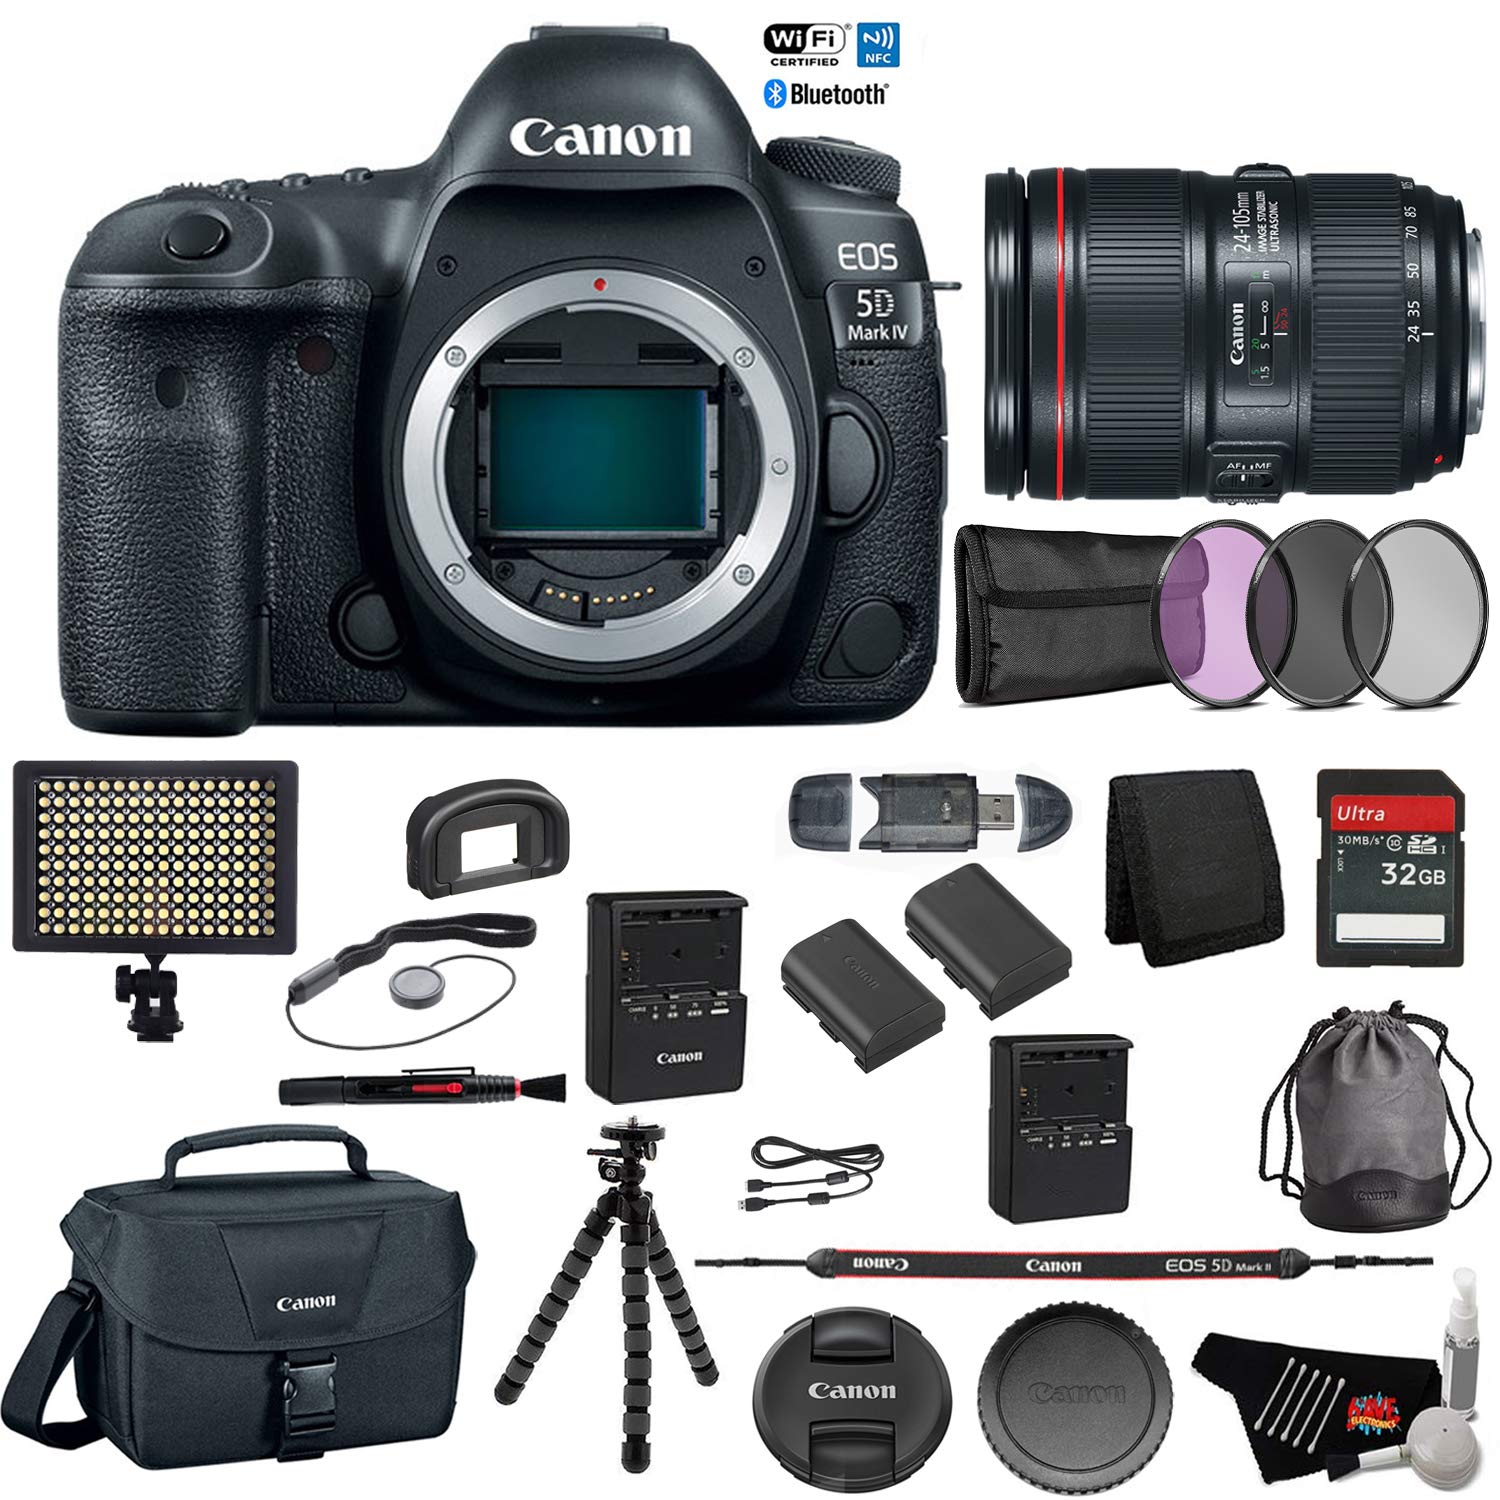 Canon EOS 5D Mark IV Digital SLR Camera with 24-105mm f/4L II Lens - Bundle with Spare Battery + Tripod + LED Light + 32